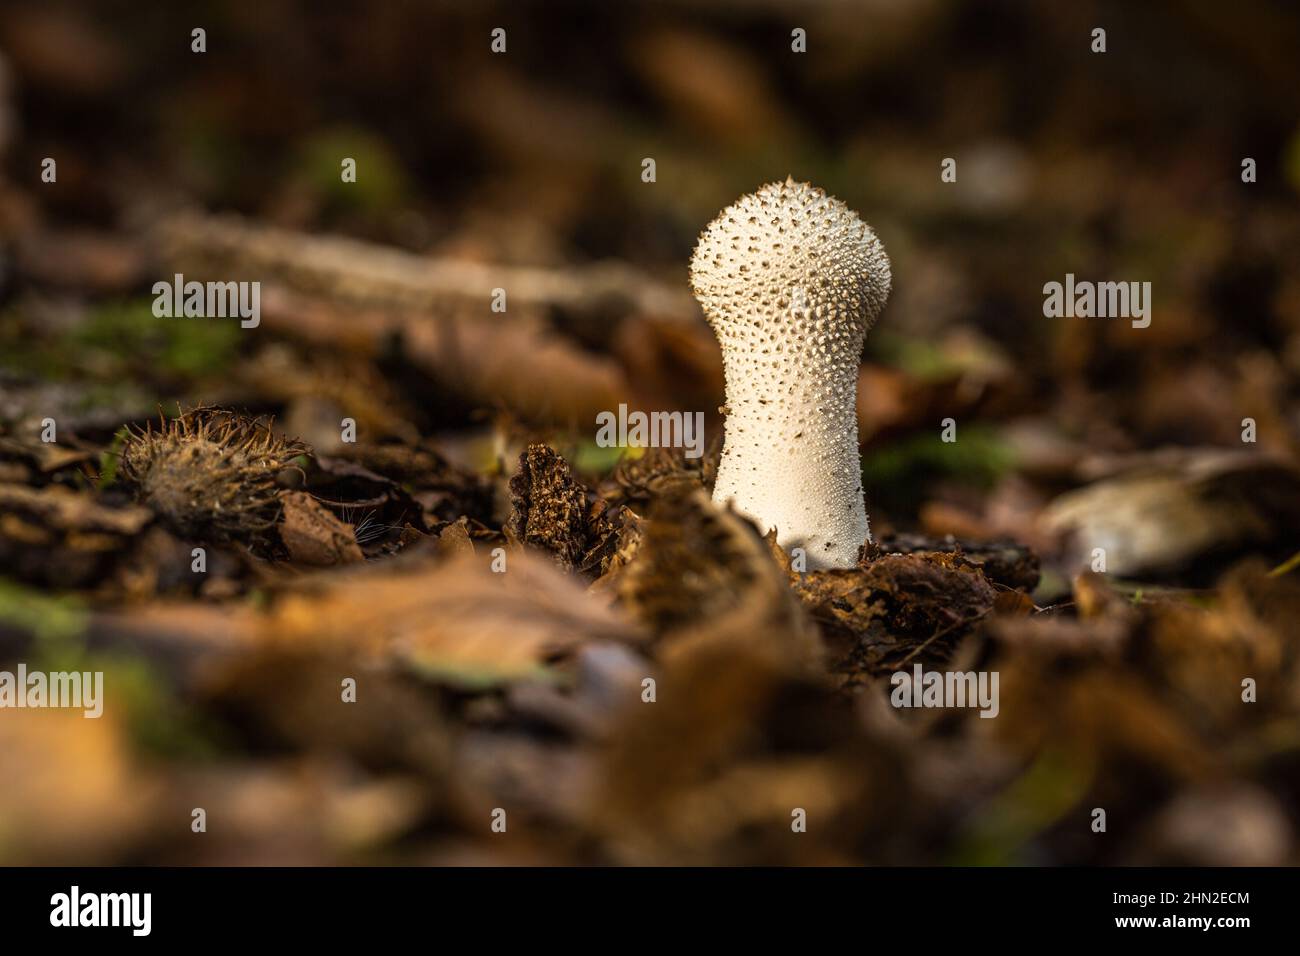 Fungus in a woodland area Stock Photo